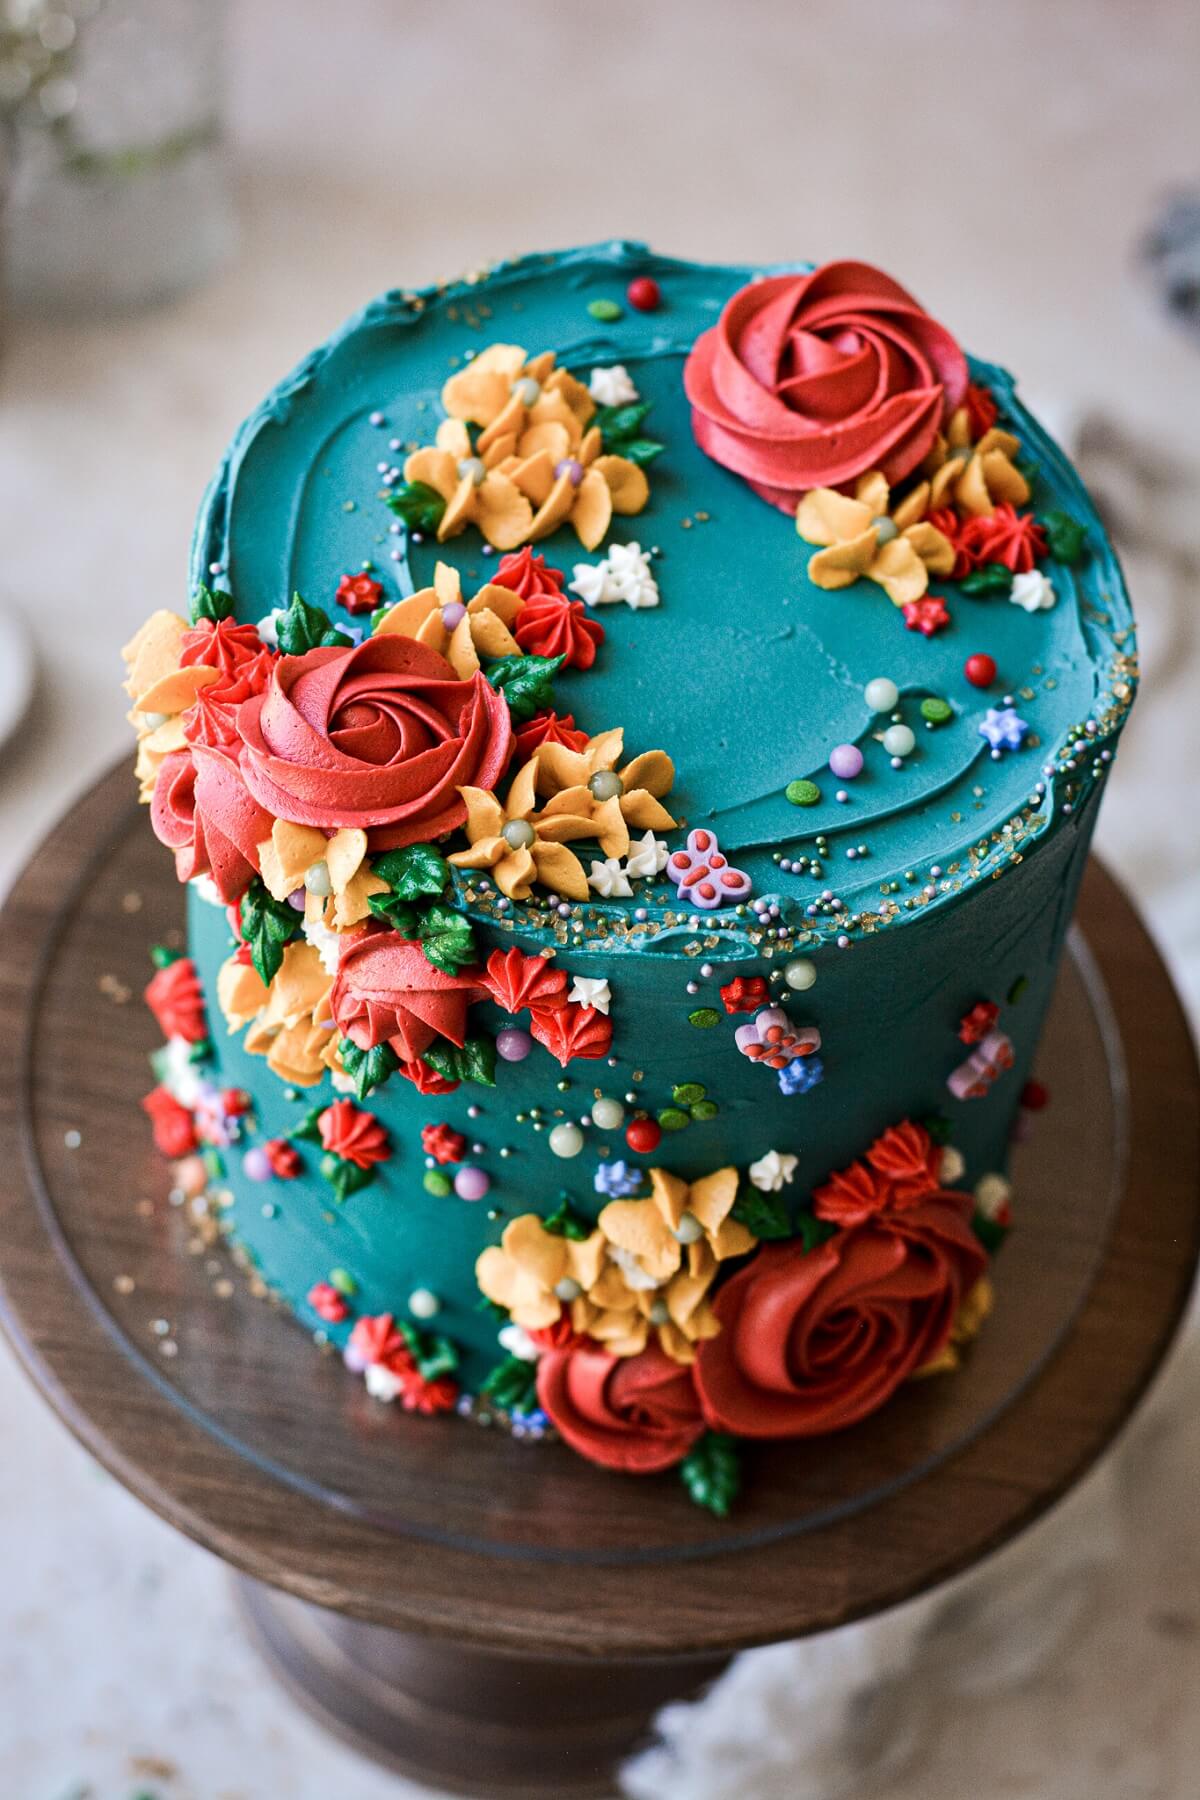 Turquoise floral cake with sprinkles and piped buttercream flowers.